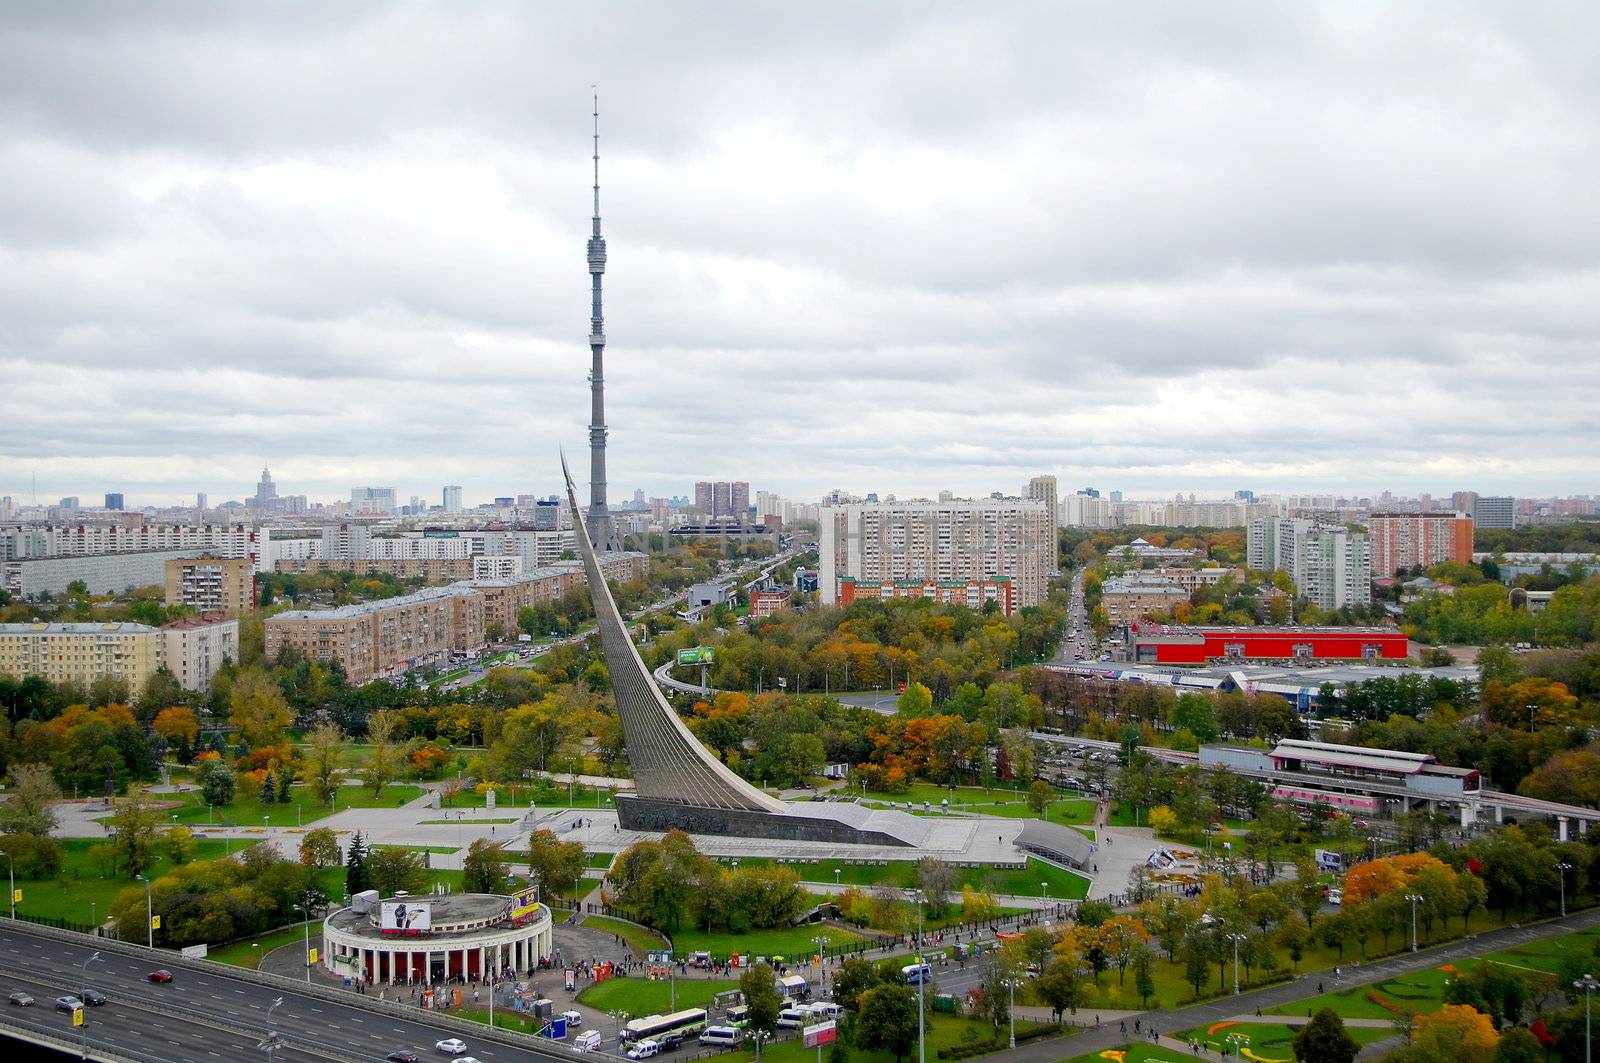 Panorama of central museum of Astronautics and Ostankino tower in Moscow, Russia by Stoyanov